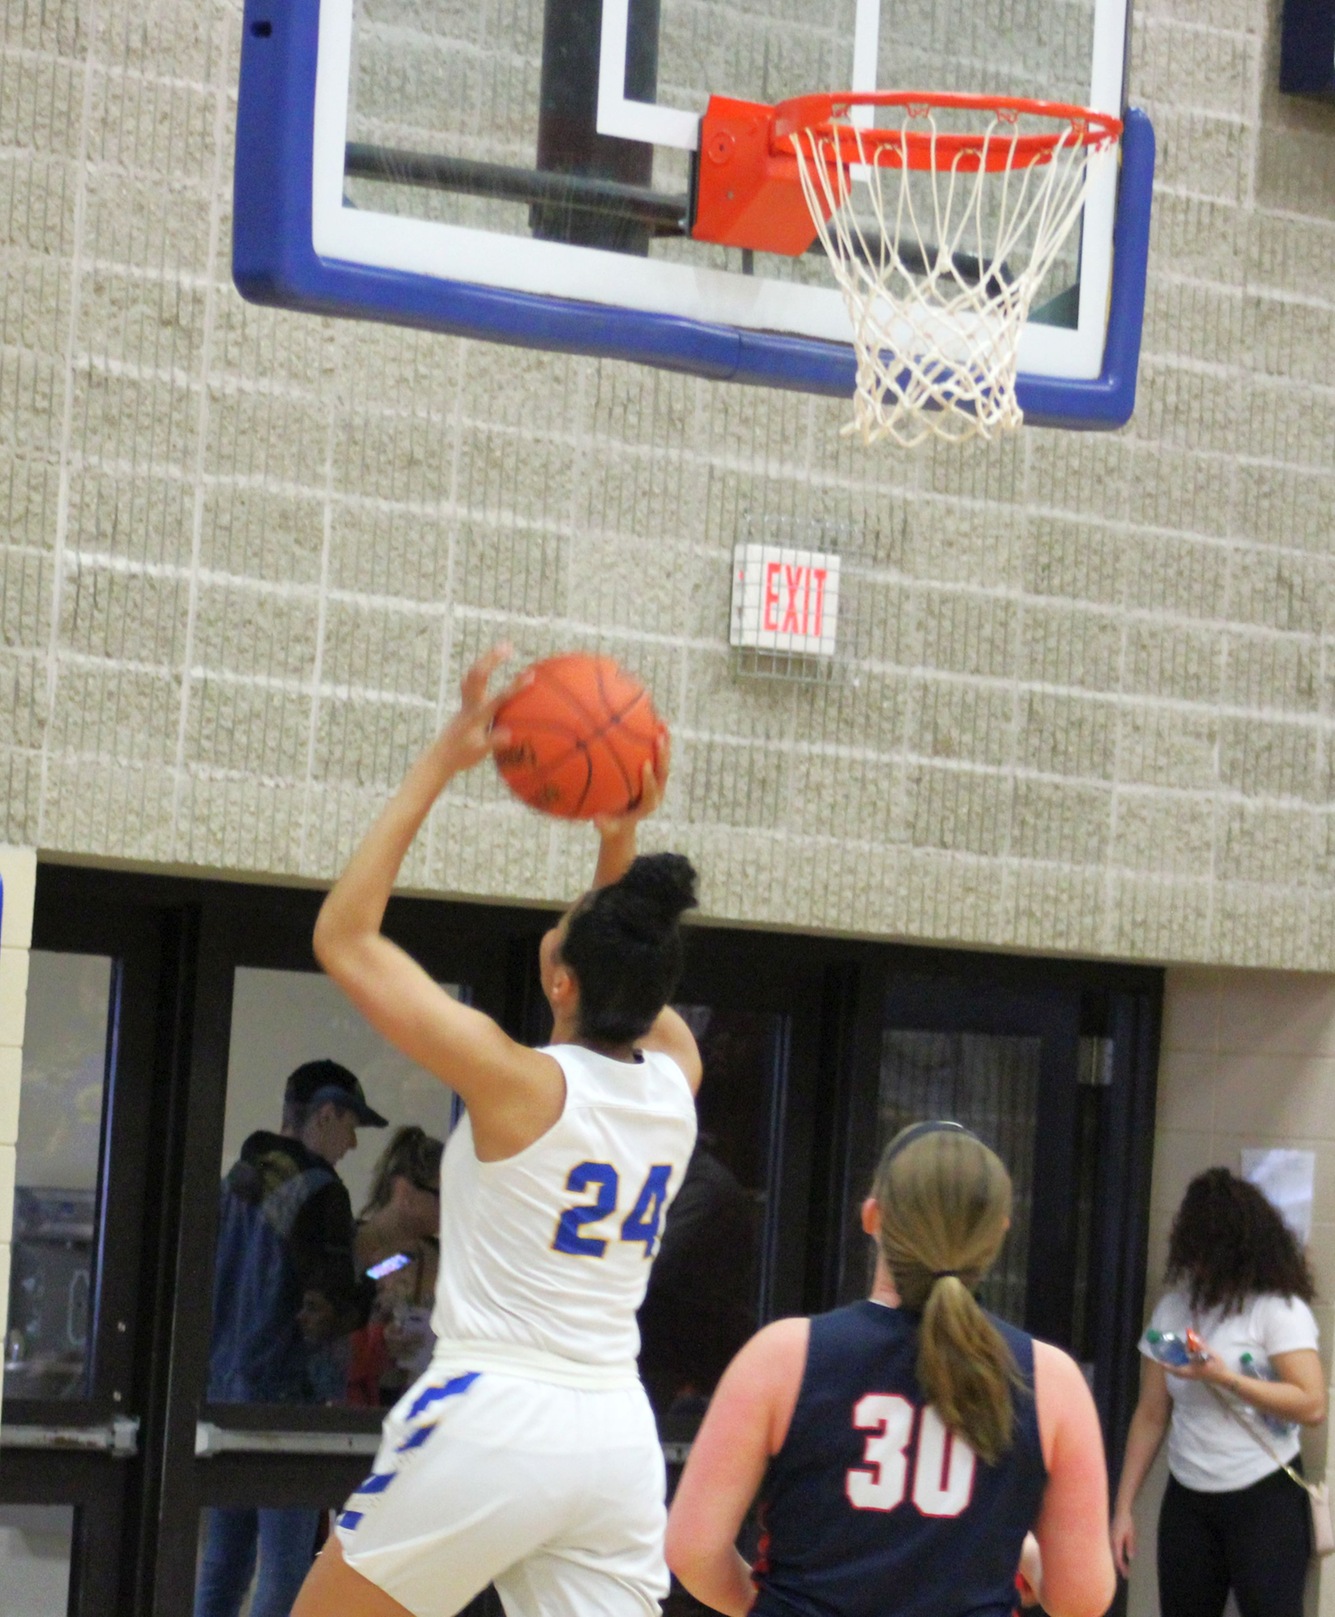 Sierra Morrow scores two of her game-high 30 points in Saturday's win over Southwestern.